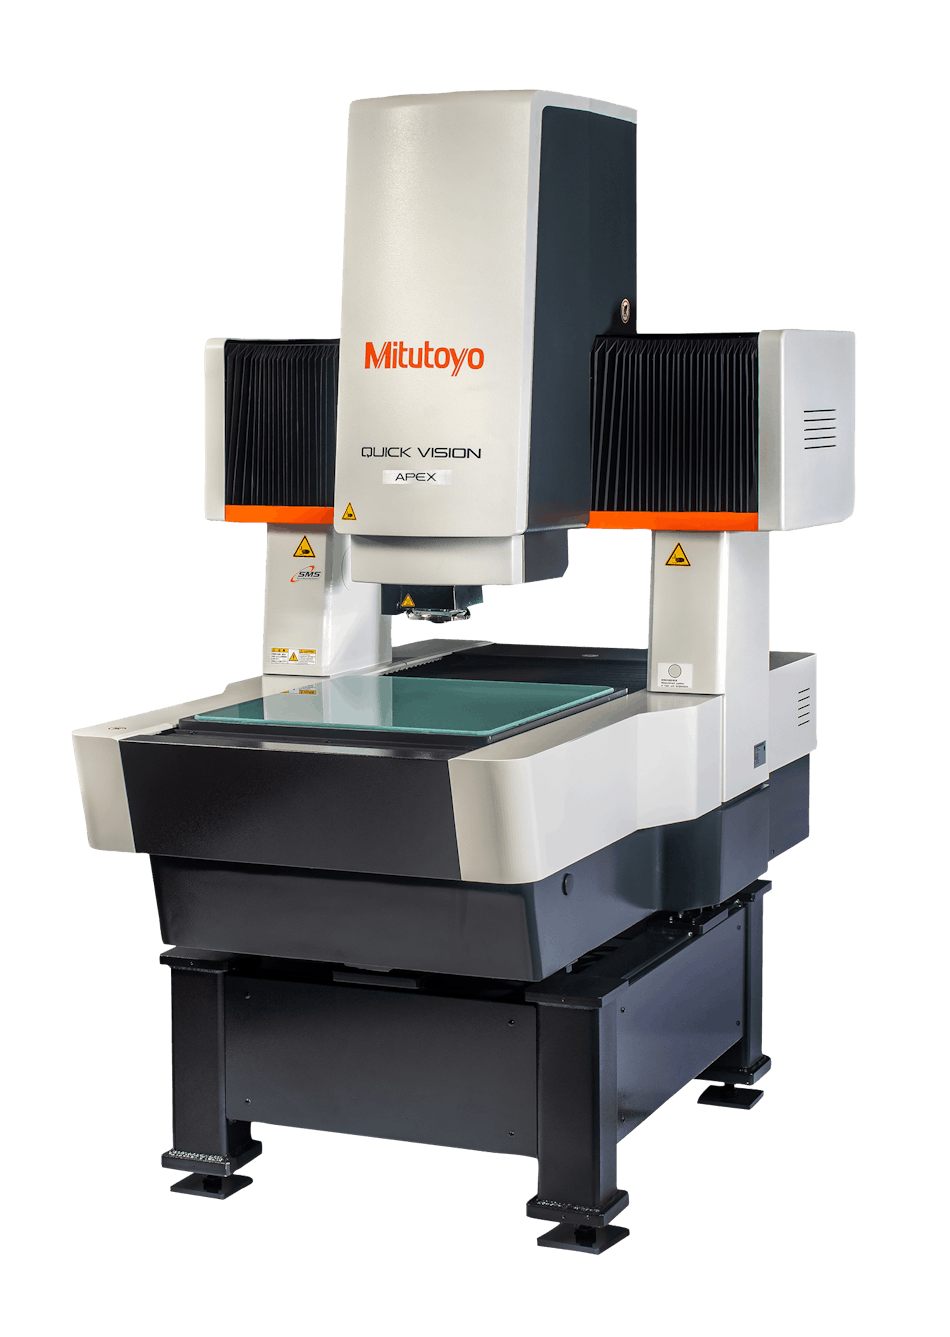 Mitutoyo&apos;s new QV Vision Pro series, including the QV and QV-Apex, offering a number of new features, including the StrobeSnap vision measuring function and improved autofocus, making them faster than comparable equipment.